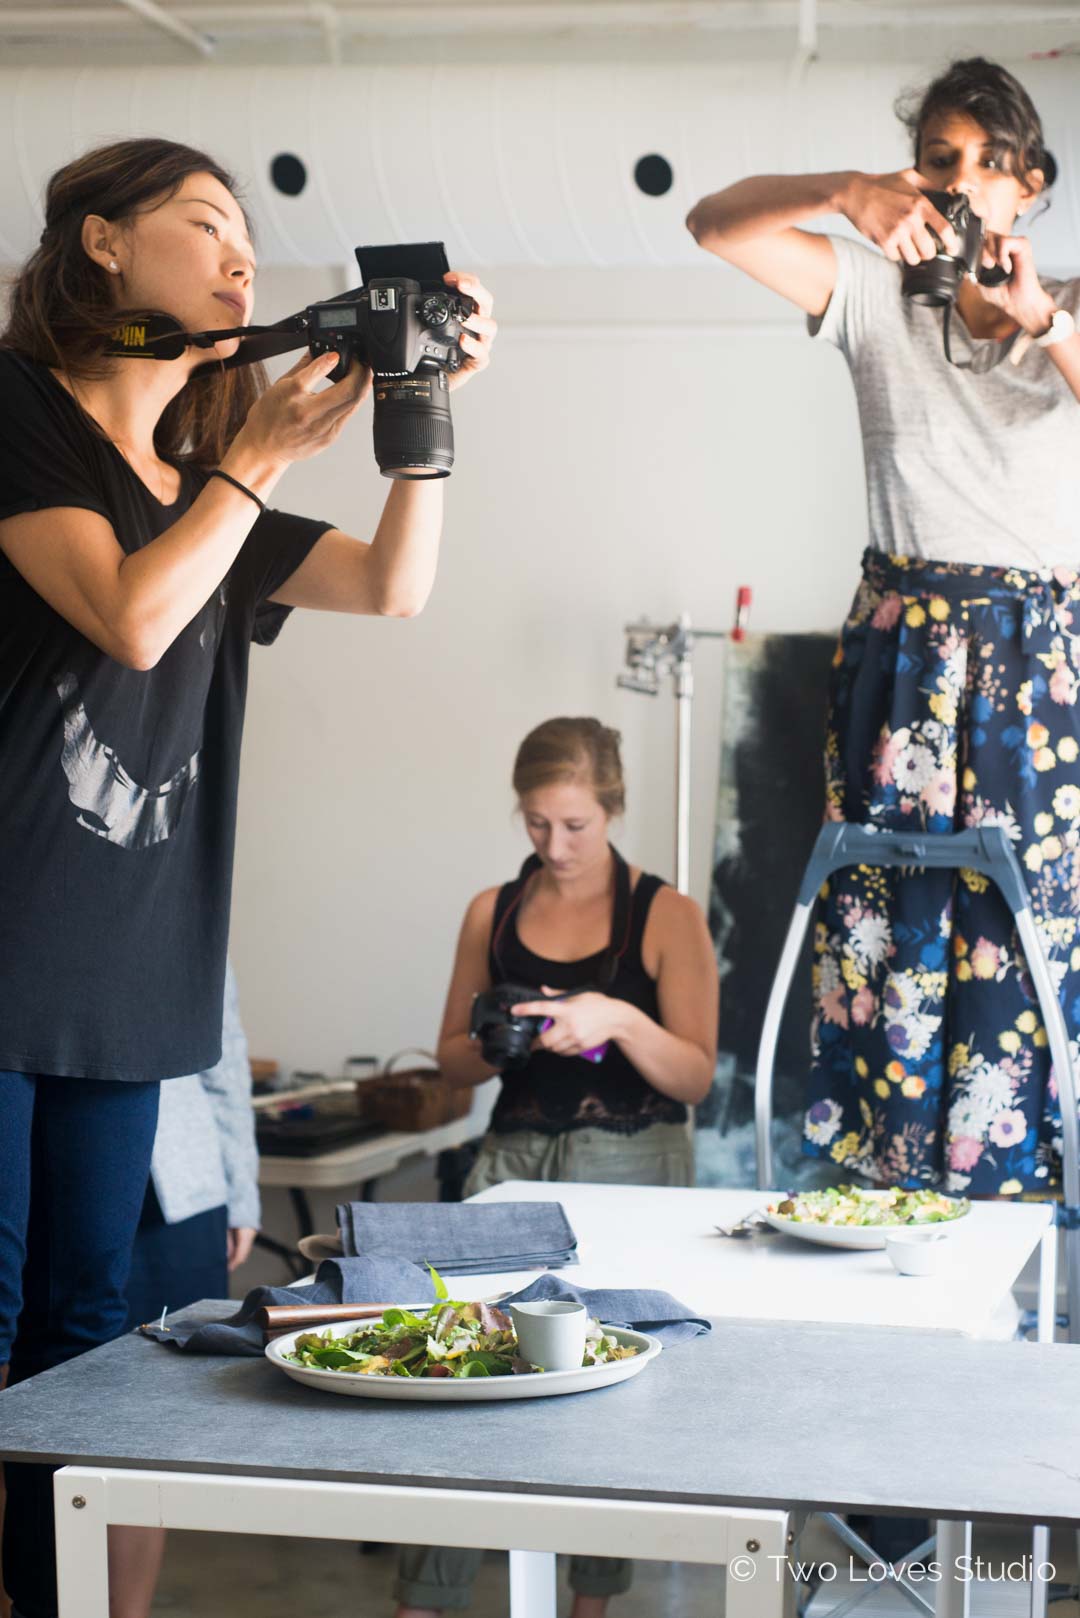 9 Things Attendees Learned at Our Toronto Composition and Styling Food Photography Workshop. Click to read and see the images!